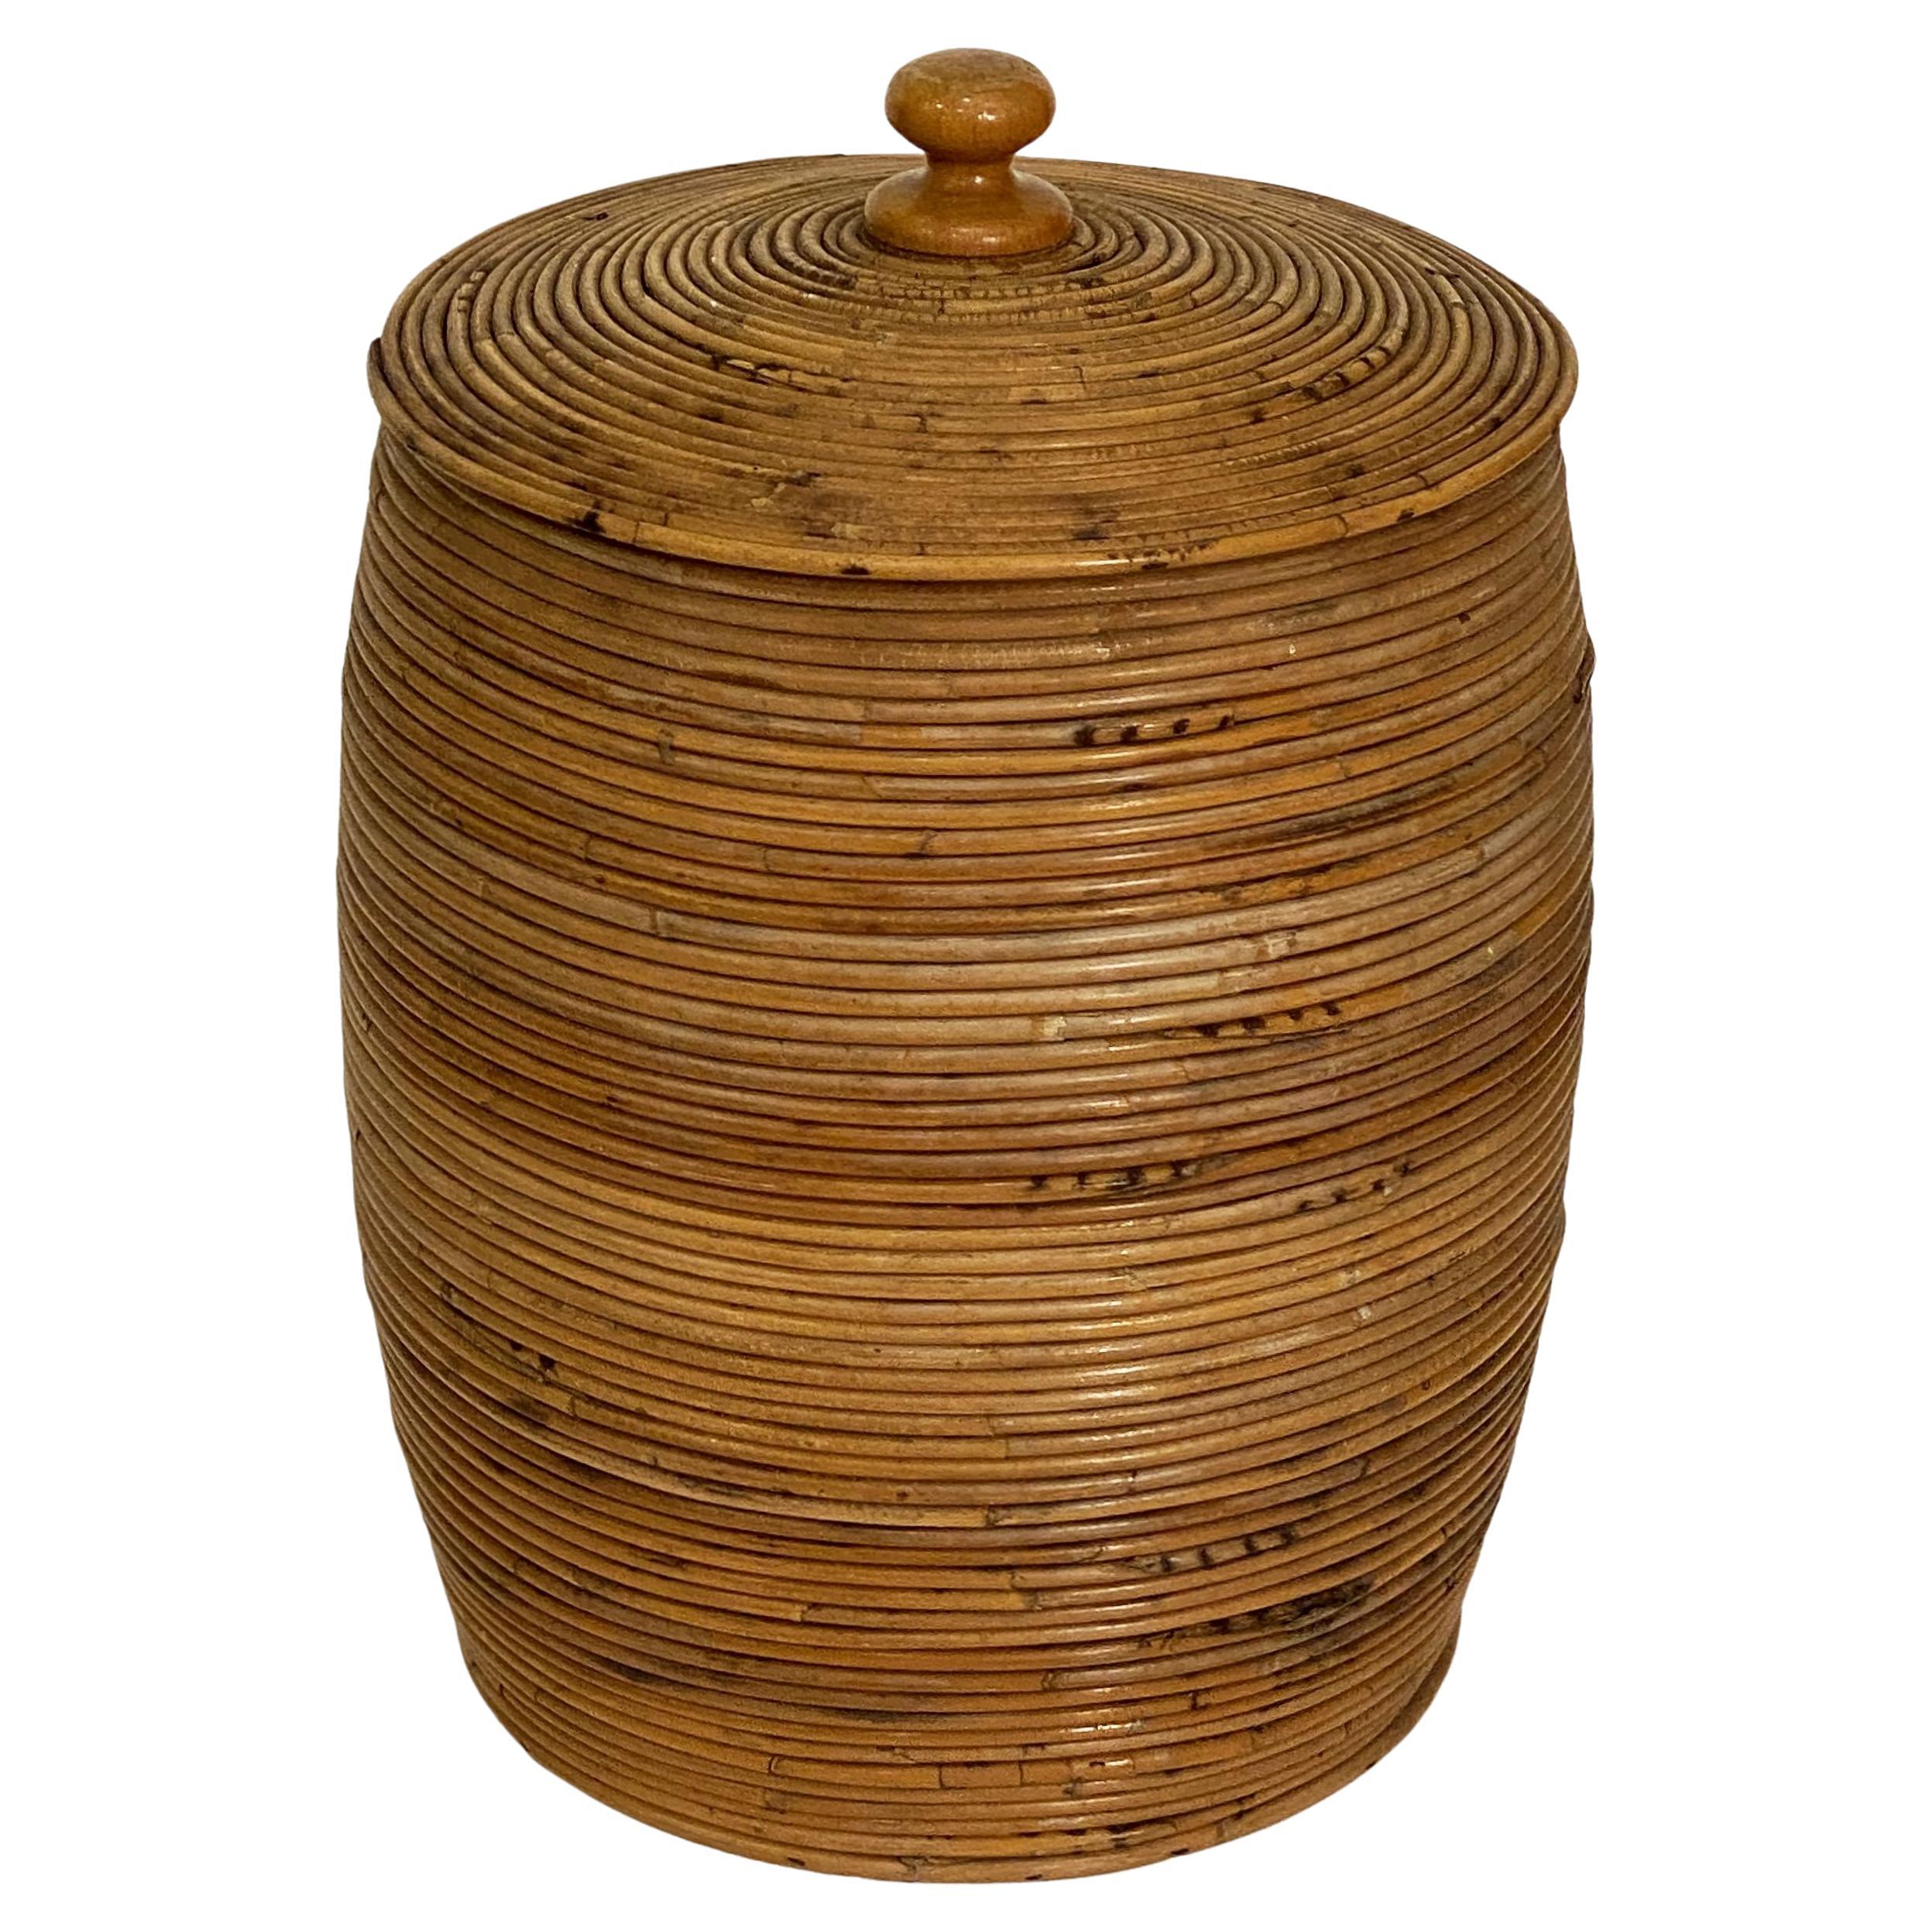 Large French Round Basket Container of Spiral-Work Cane with Lid